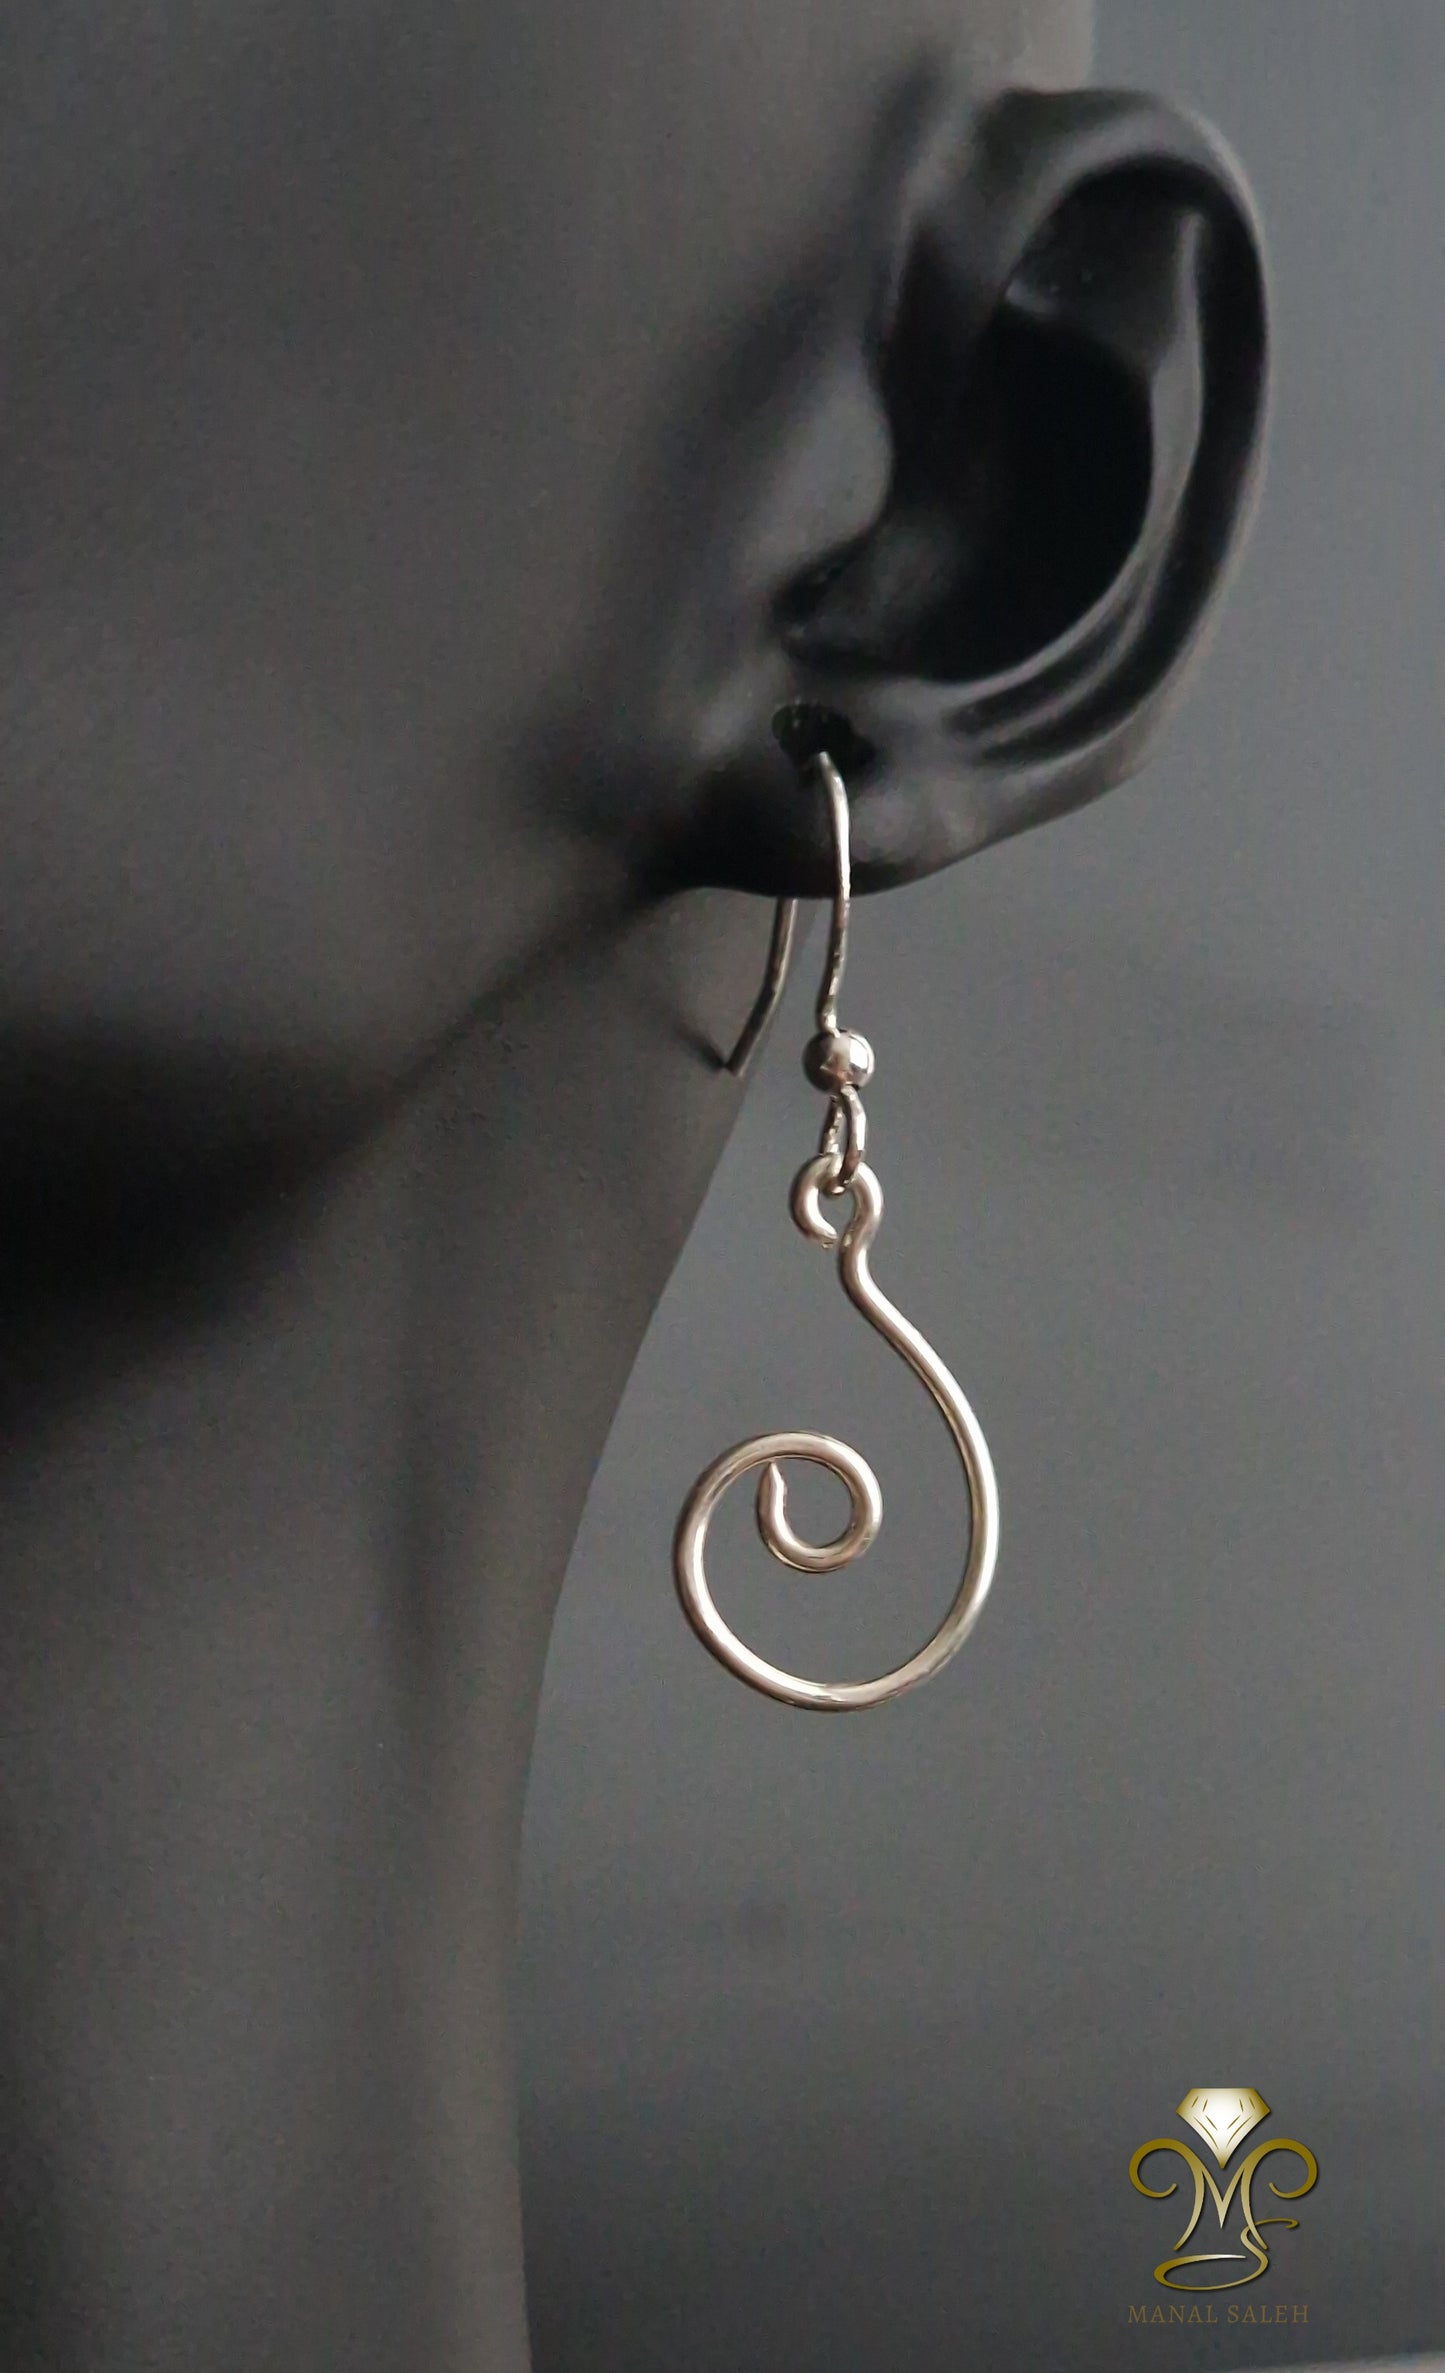 Small silver spin earrings